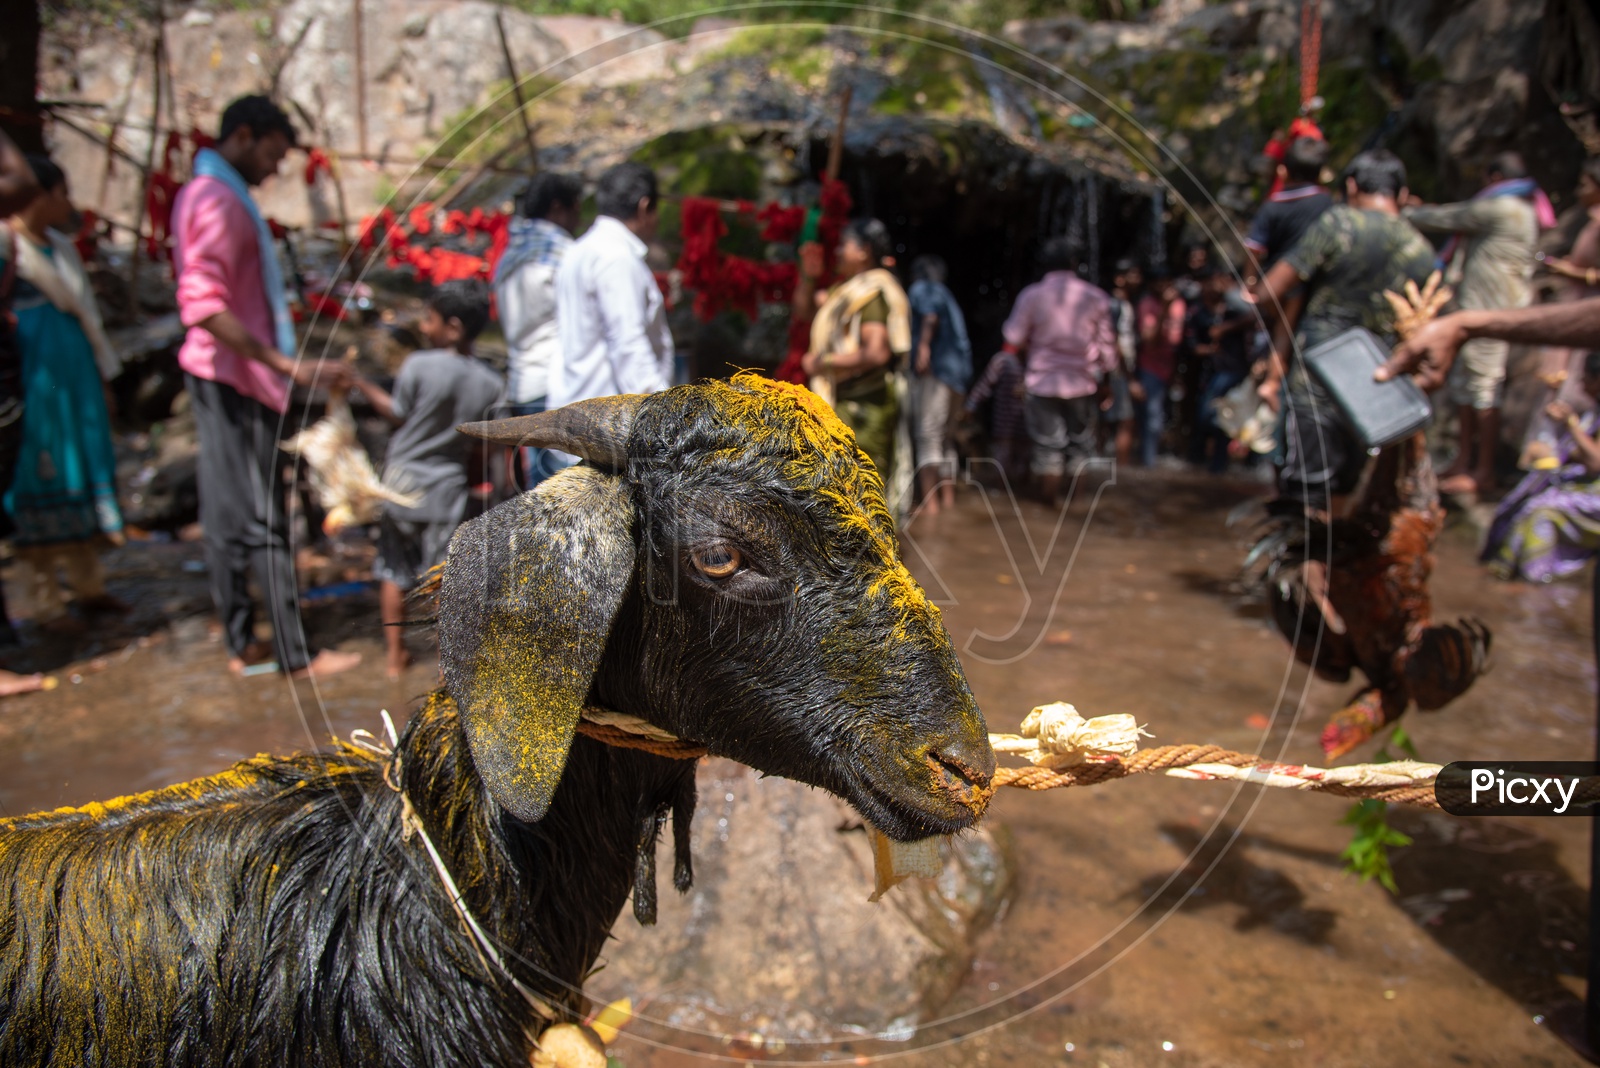 Offering goat and hen at Gubbala Mangamma Thalli Temple